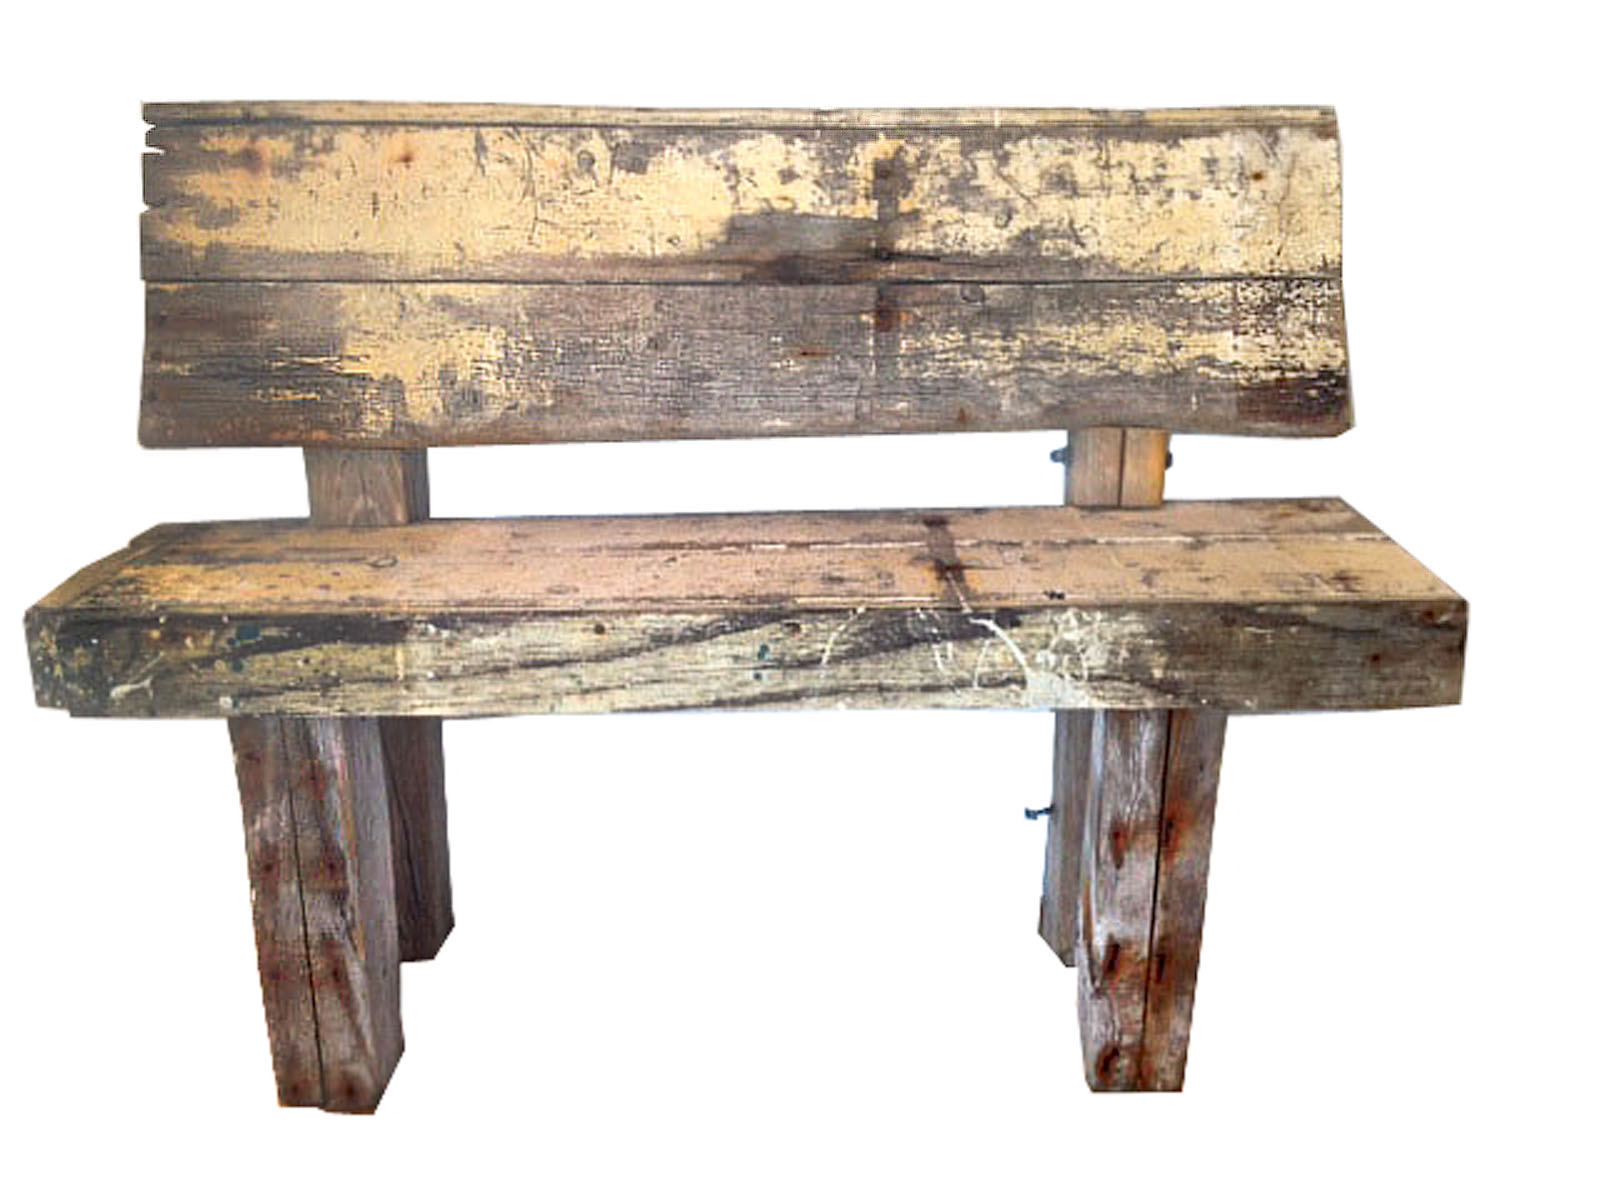    Deck Bench    driftwood and reclaimed wood  32" x 44" x 16"  2012  (available) 